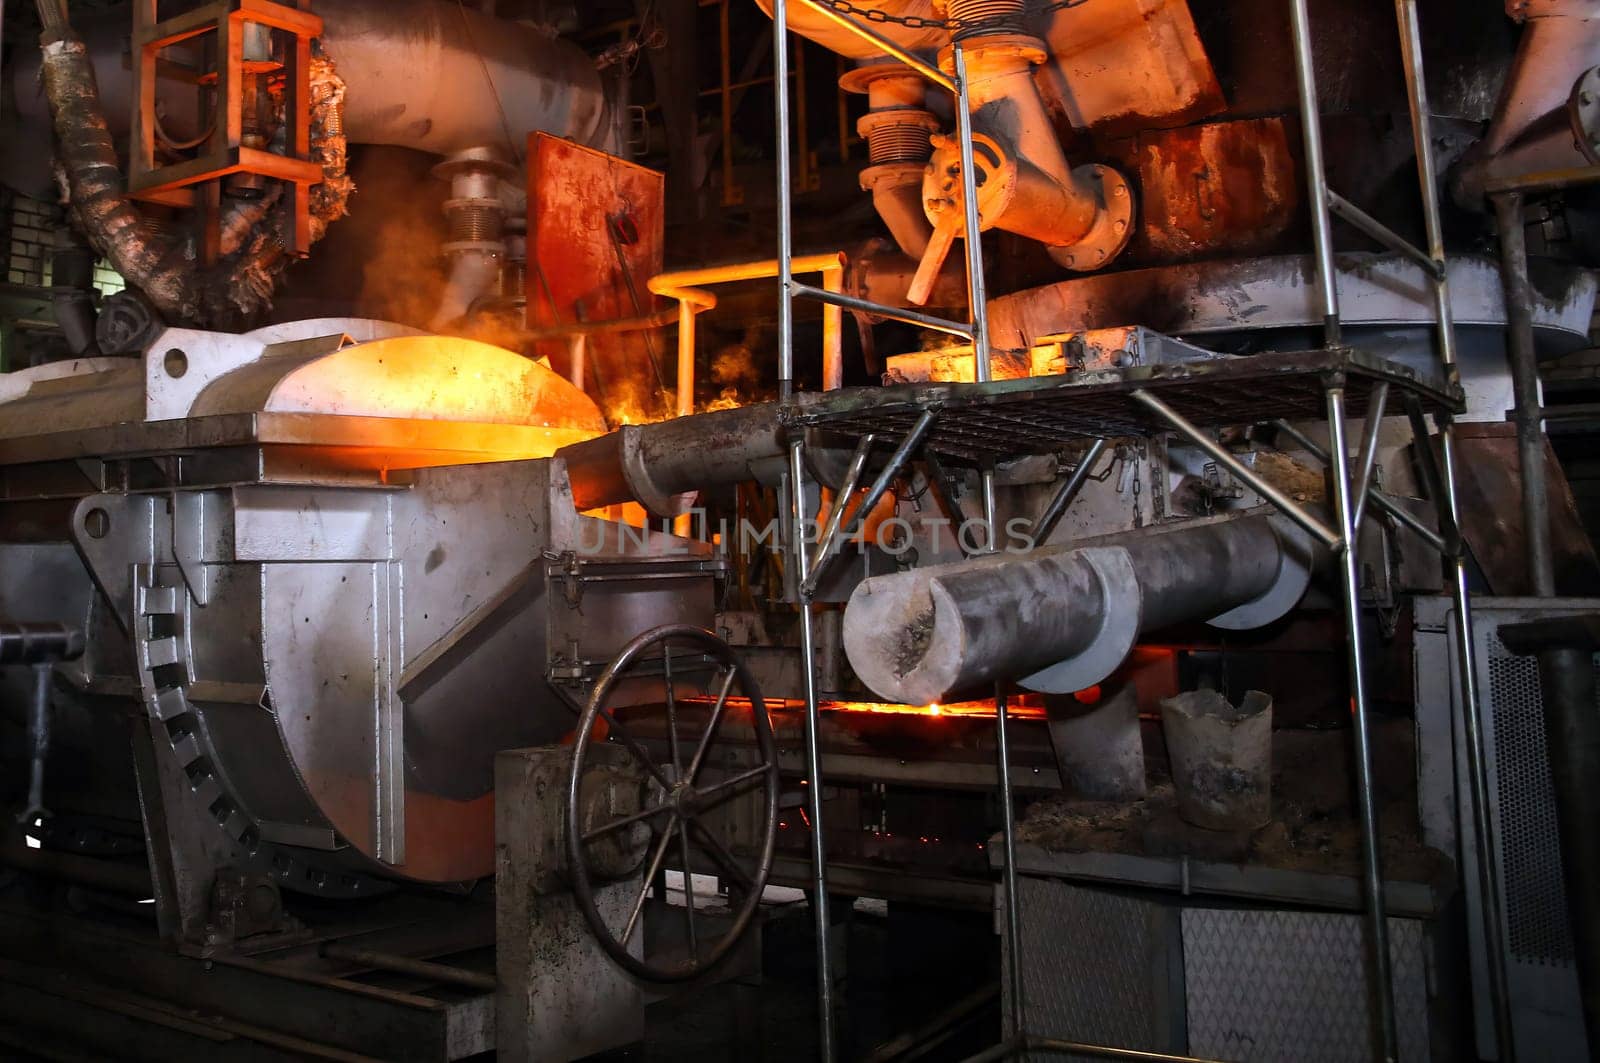 Molten metal is being poured from a ladle into a mold in a steel mill. The factory is filled with heavy industry machinery and equipment. This is a metallurgy and metalworking theme.